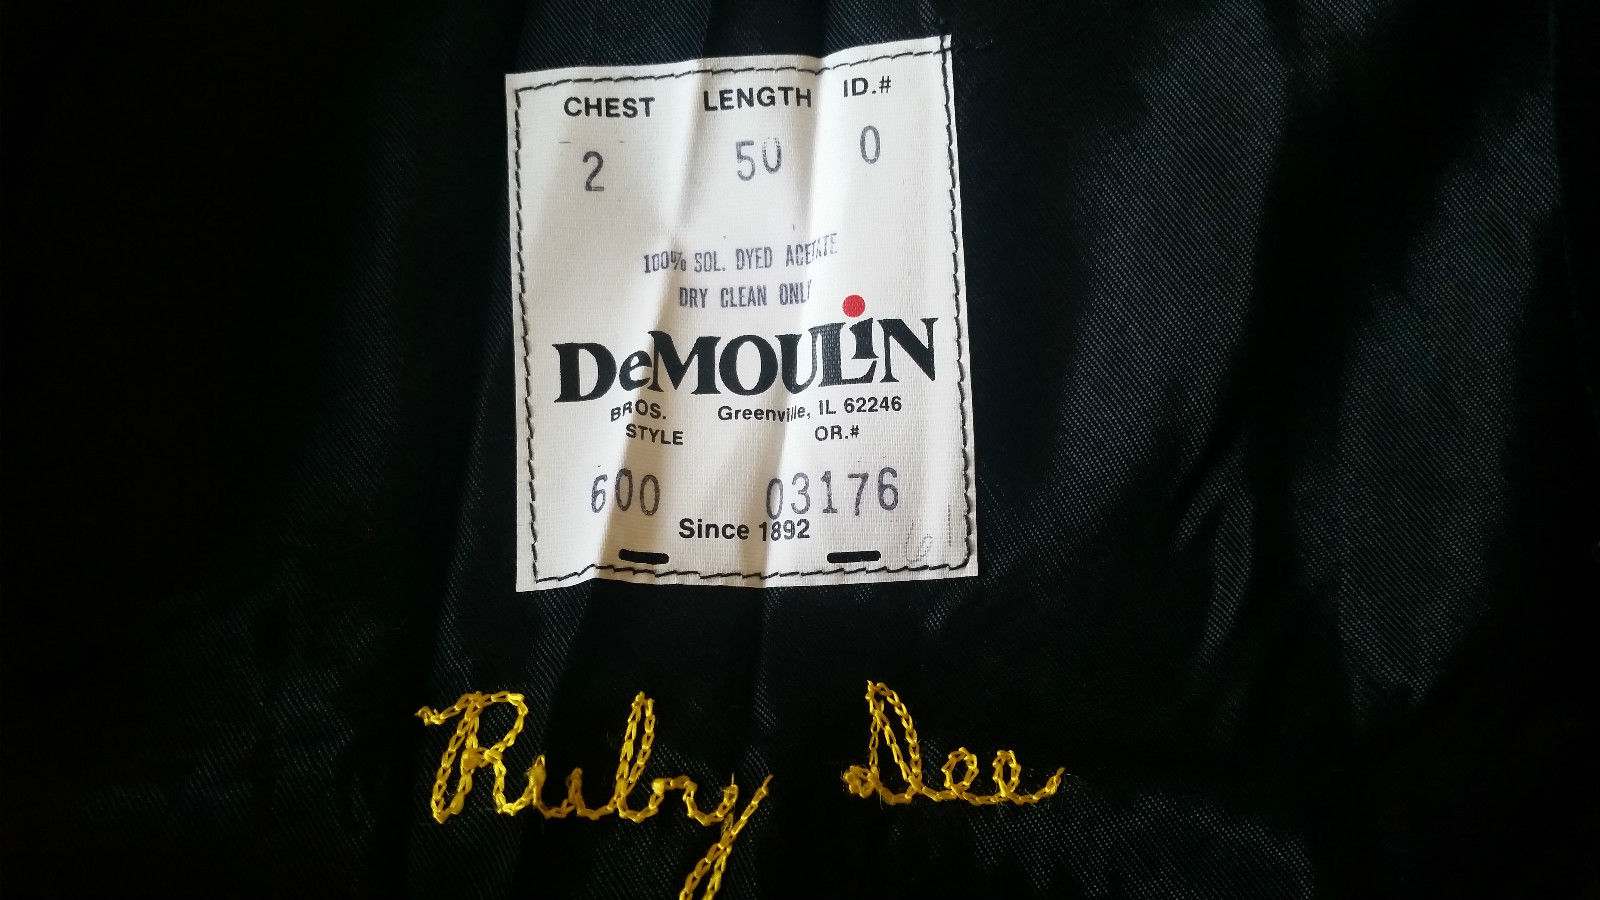 The DeMoulin manufacturing label inside the gown with Ms. Dee's name embroidered below it.